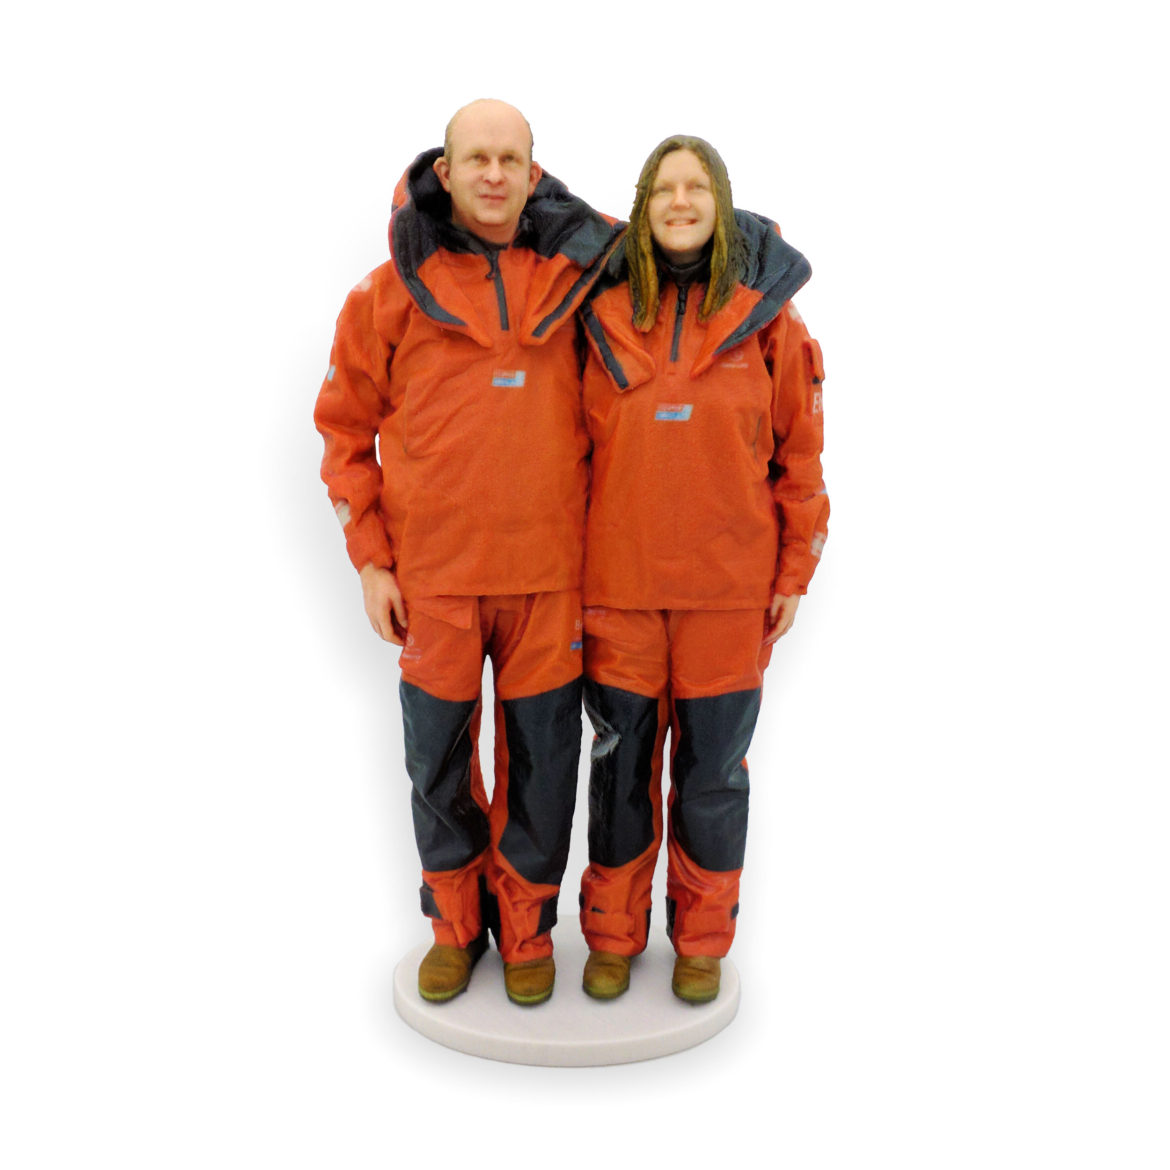 my3Dtwin, 3D Pinted Custom Figurines of a couple in orange overalls